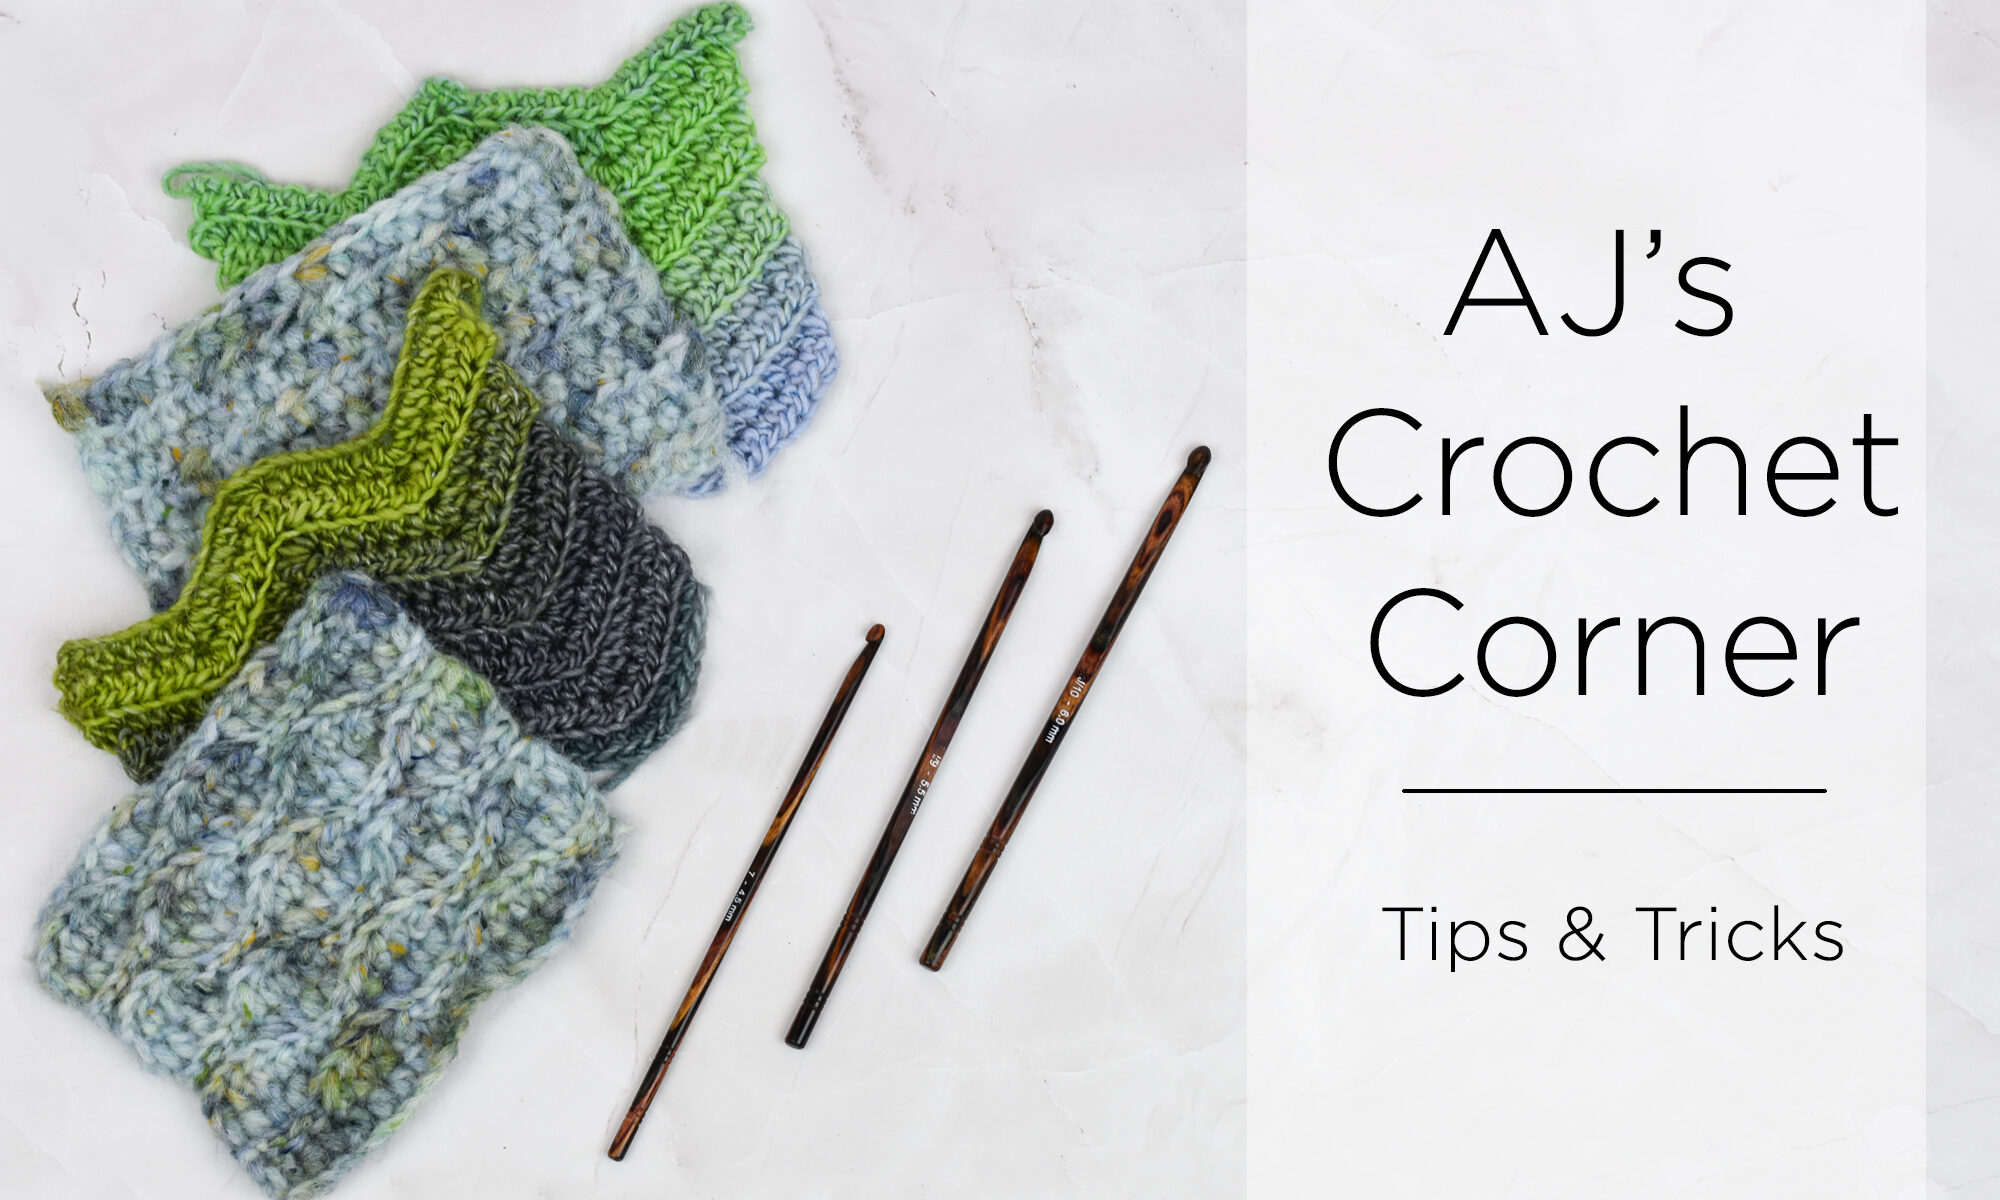 Sample Swatches of crochet stitches lay in an arrangement next to three crochet hooks. The heading "AJ's Crochet Corner, Tips and Tricks" is present.